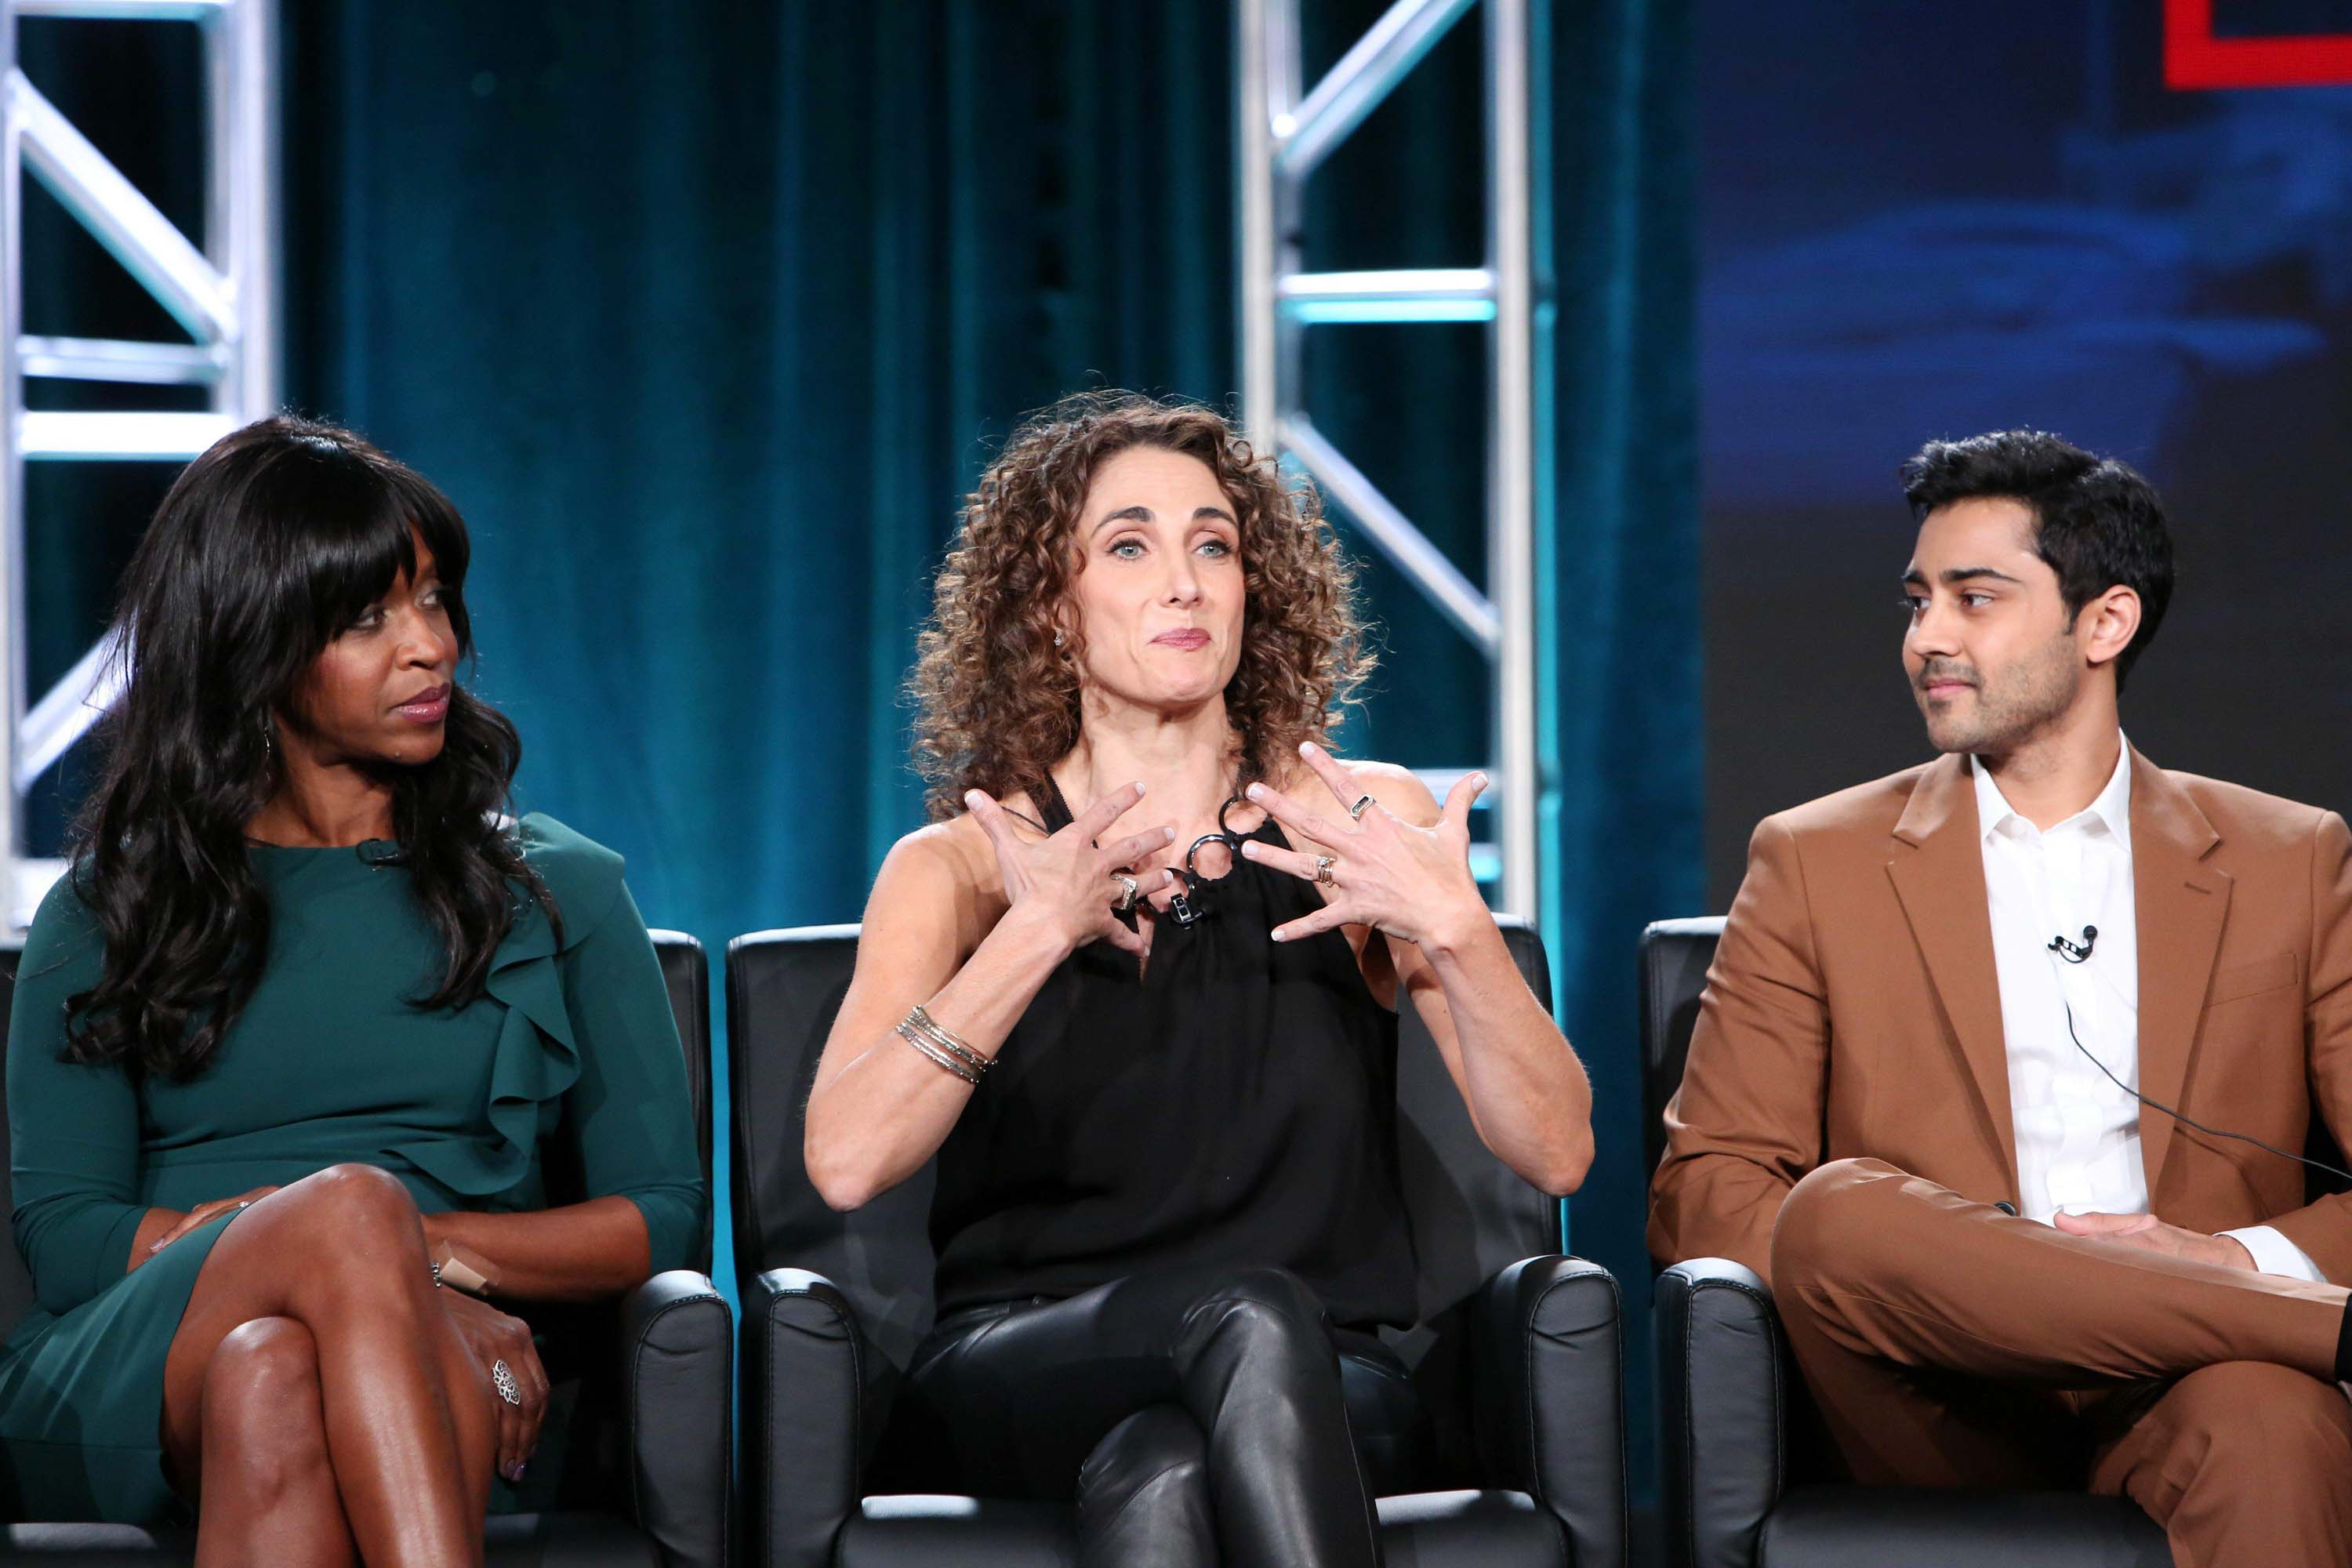 Melina Kanakaredes attends FOX The Resident TV show panel